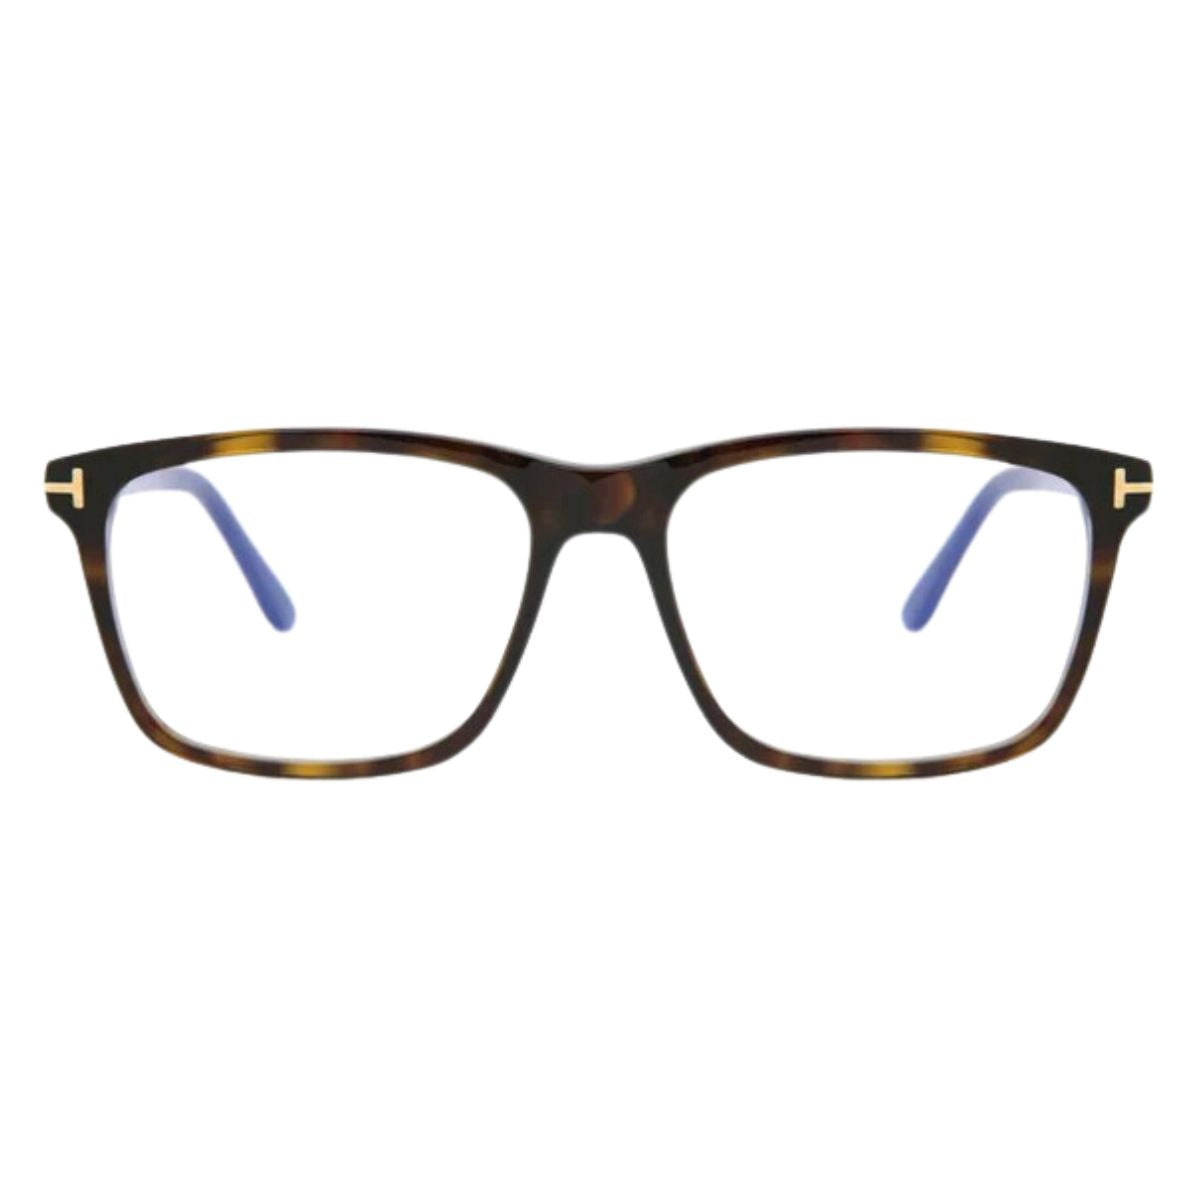 "Tom Ford TF 5479 052 optical glasses for men in square shape with Havana color frame, available at Optorium with free shipping across India."